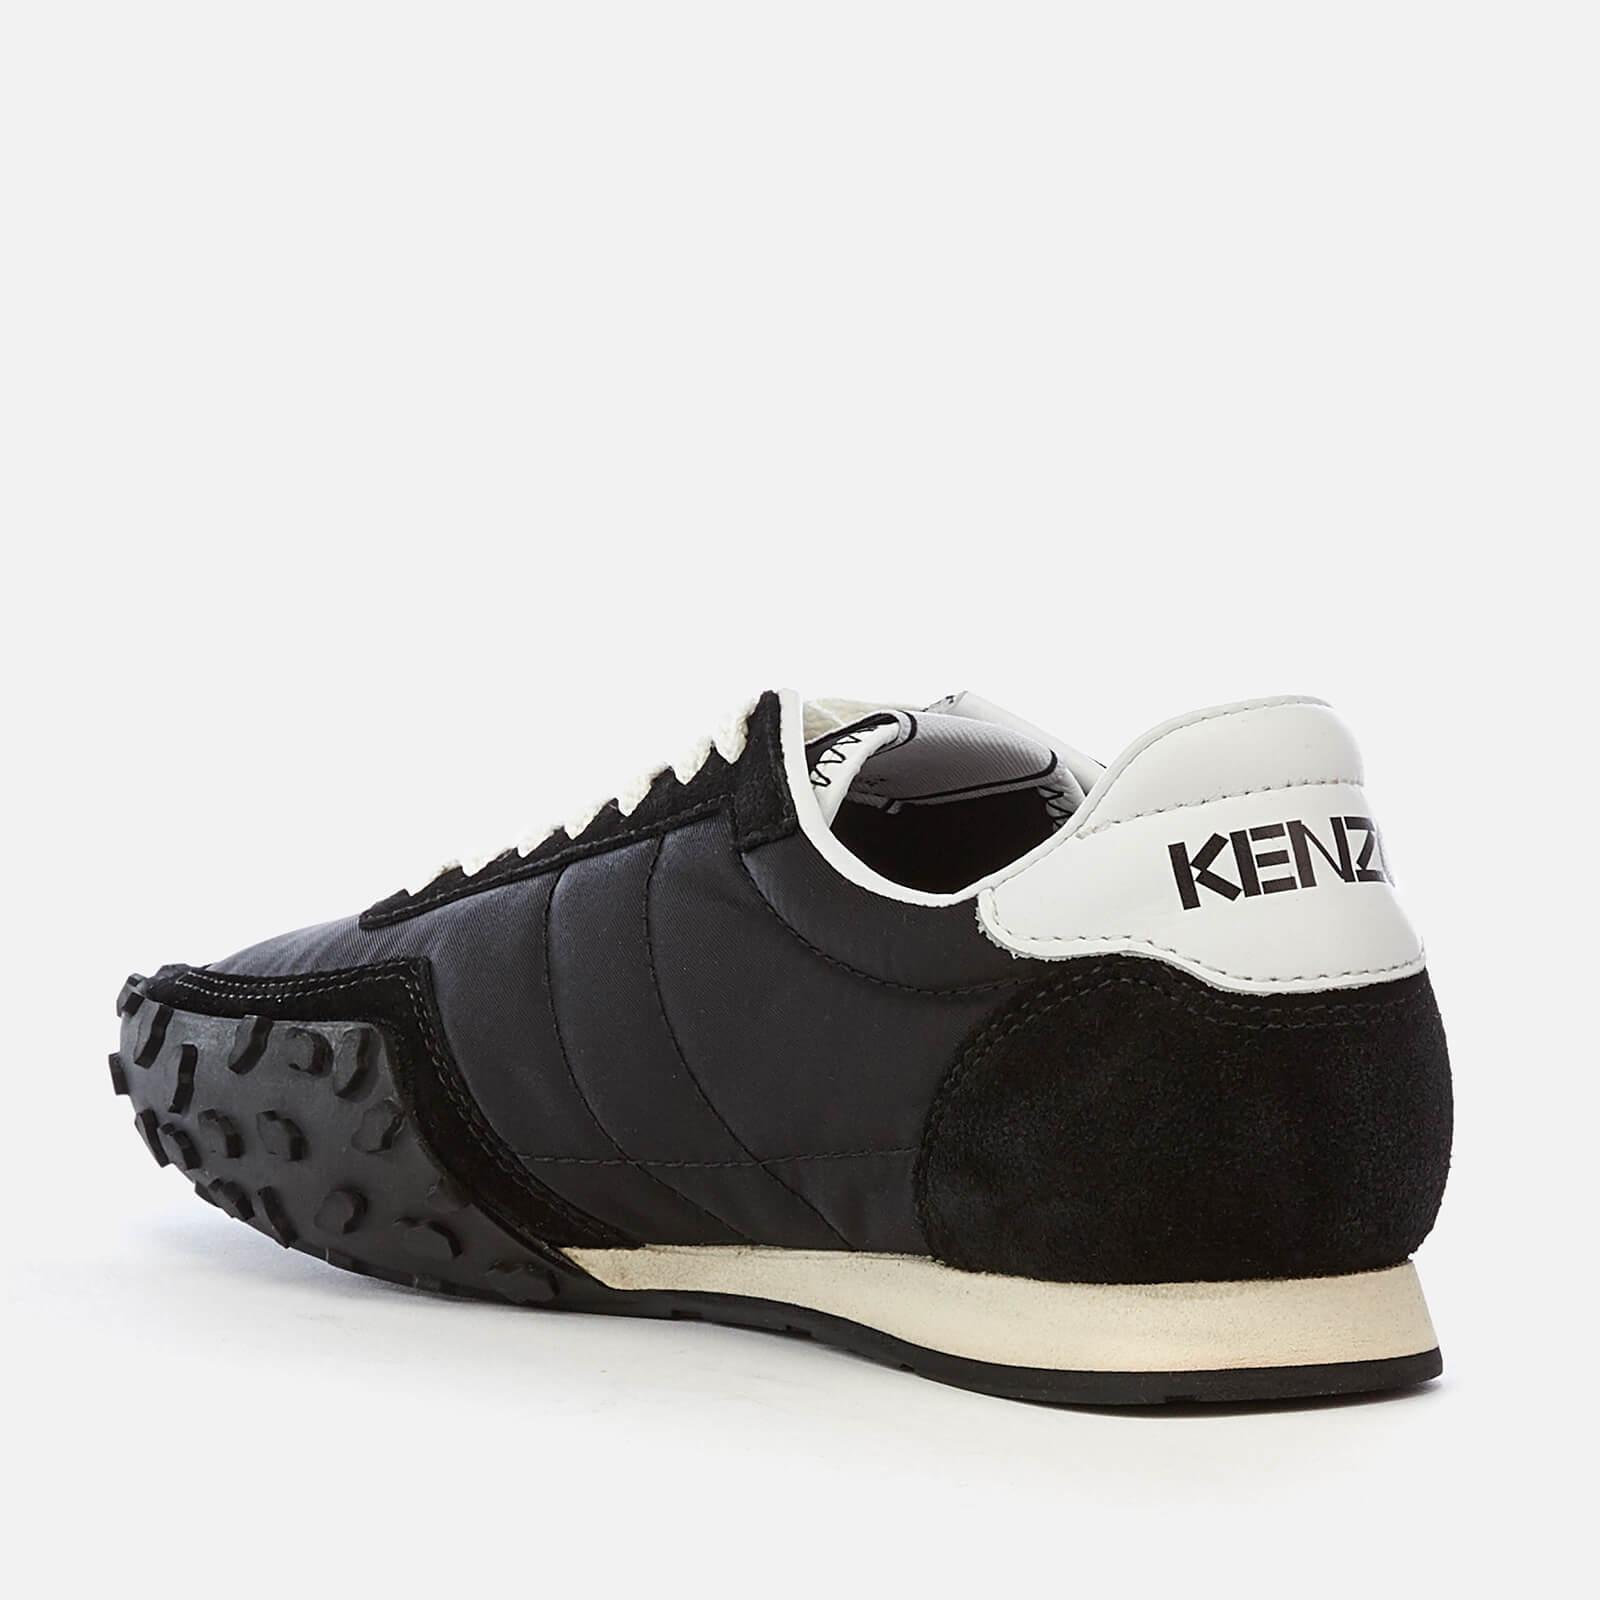 KENZO Synthetic Move Trainers in Black - Lyst